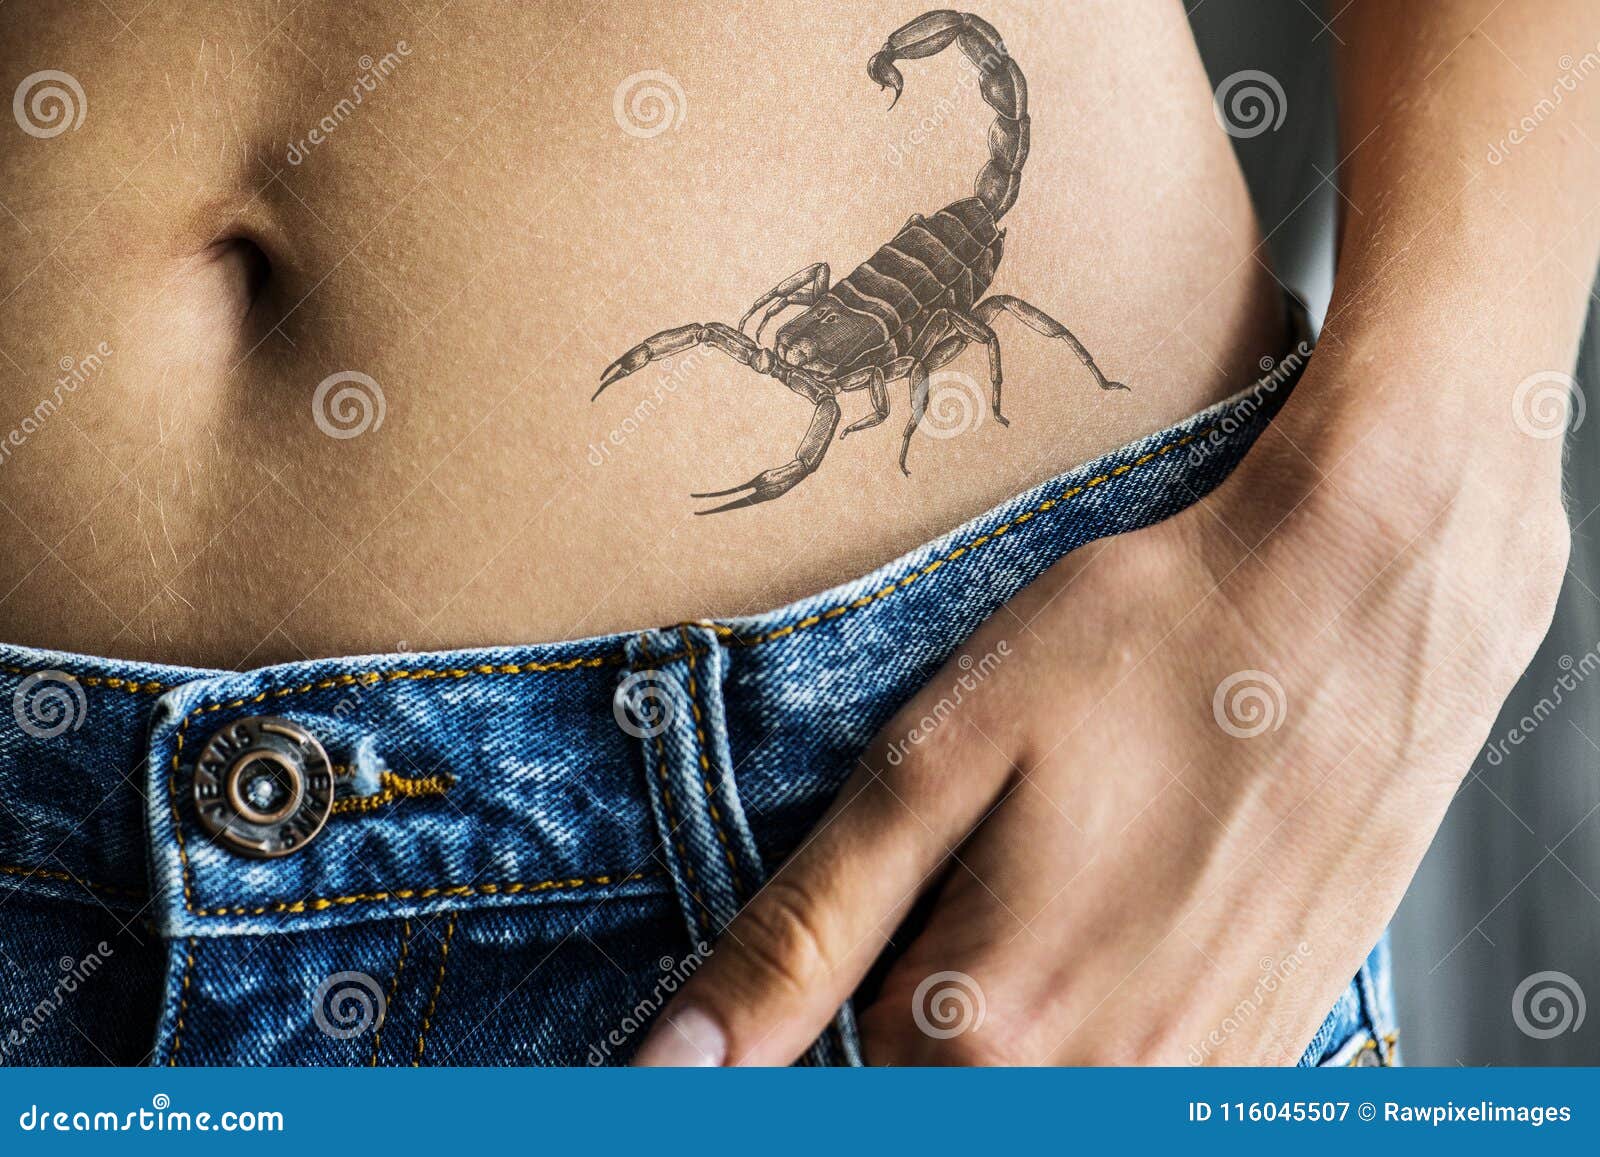 Closeup of Lower Hip Tattoo of a Woman Stock Image - Image of decorate,  cool: 116045507